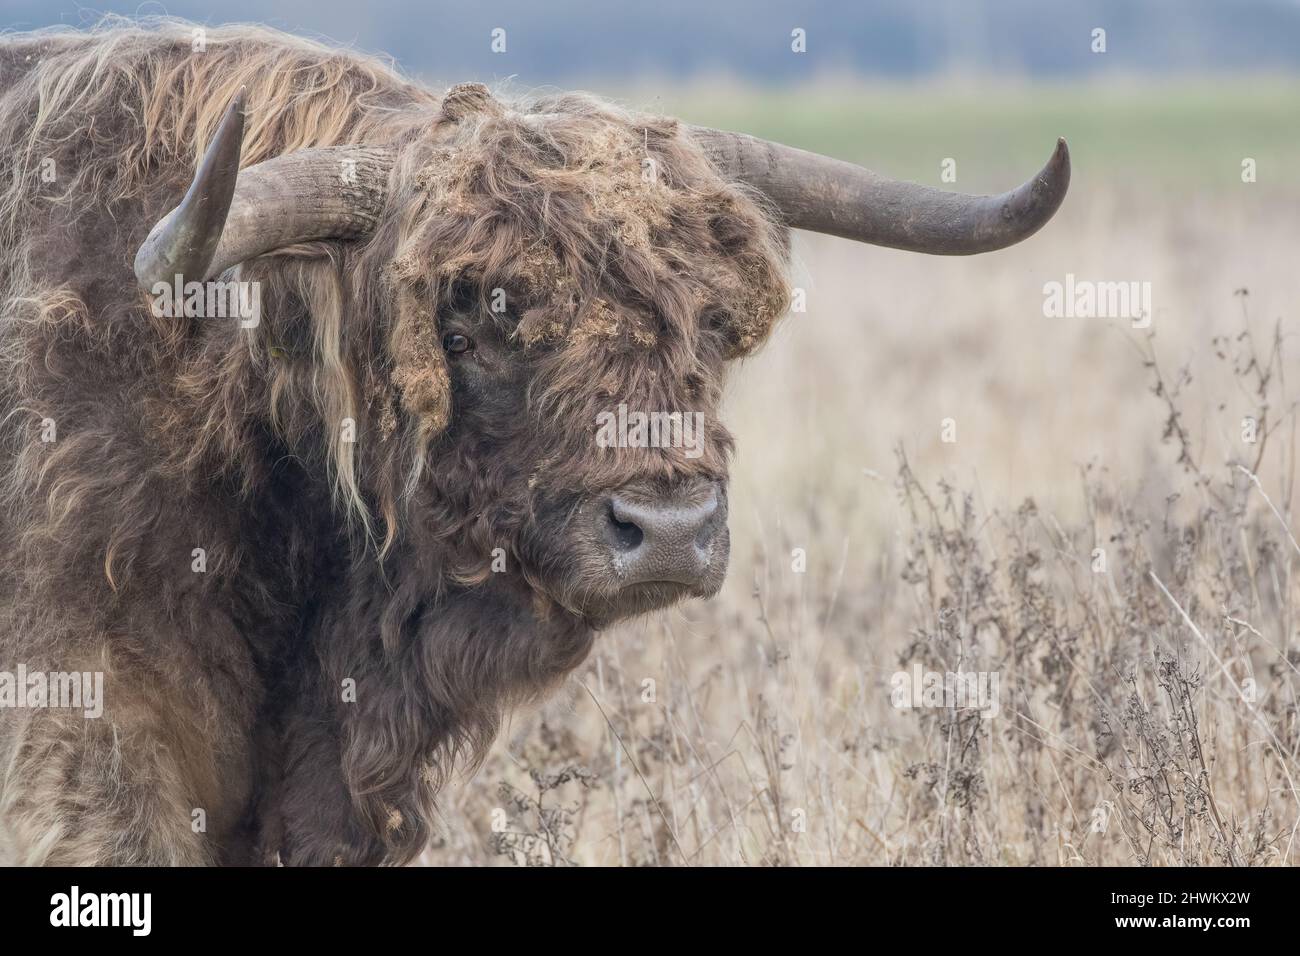 A big Highland bull with enormous horns having a very bad hair day. His shaggy coat is matted with burrs picked up whilst grazing. Canbridge Fens UK Stock Photo